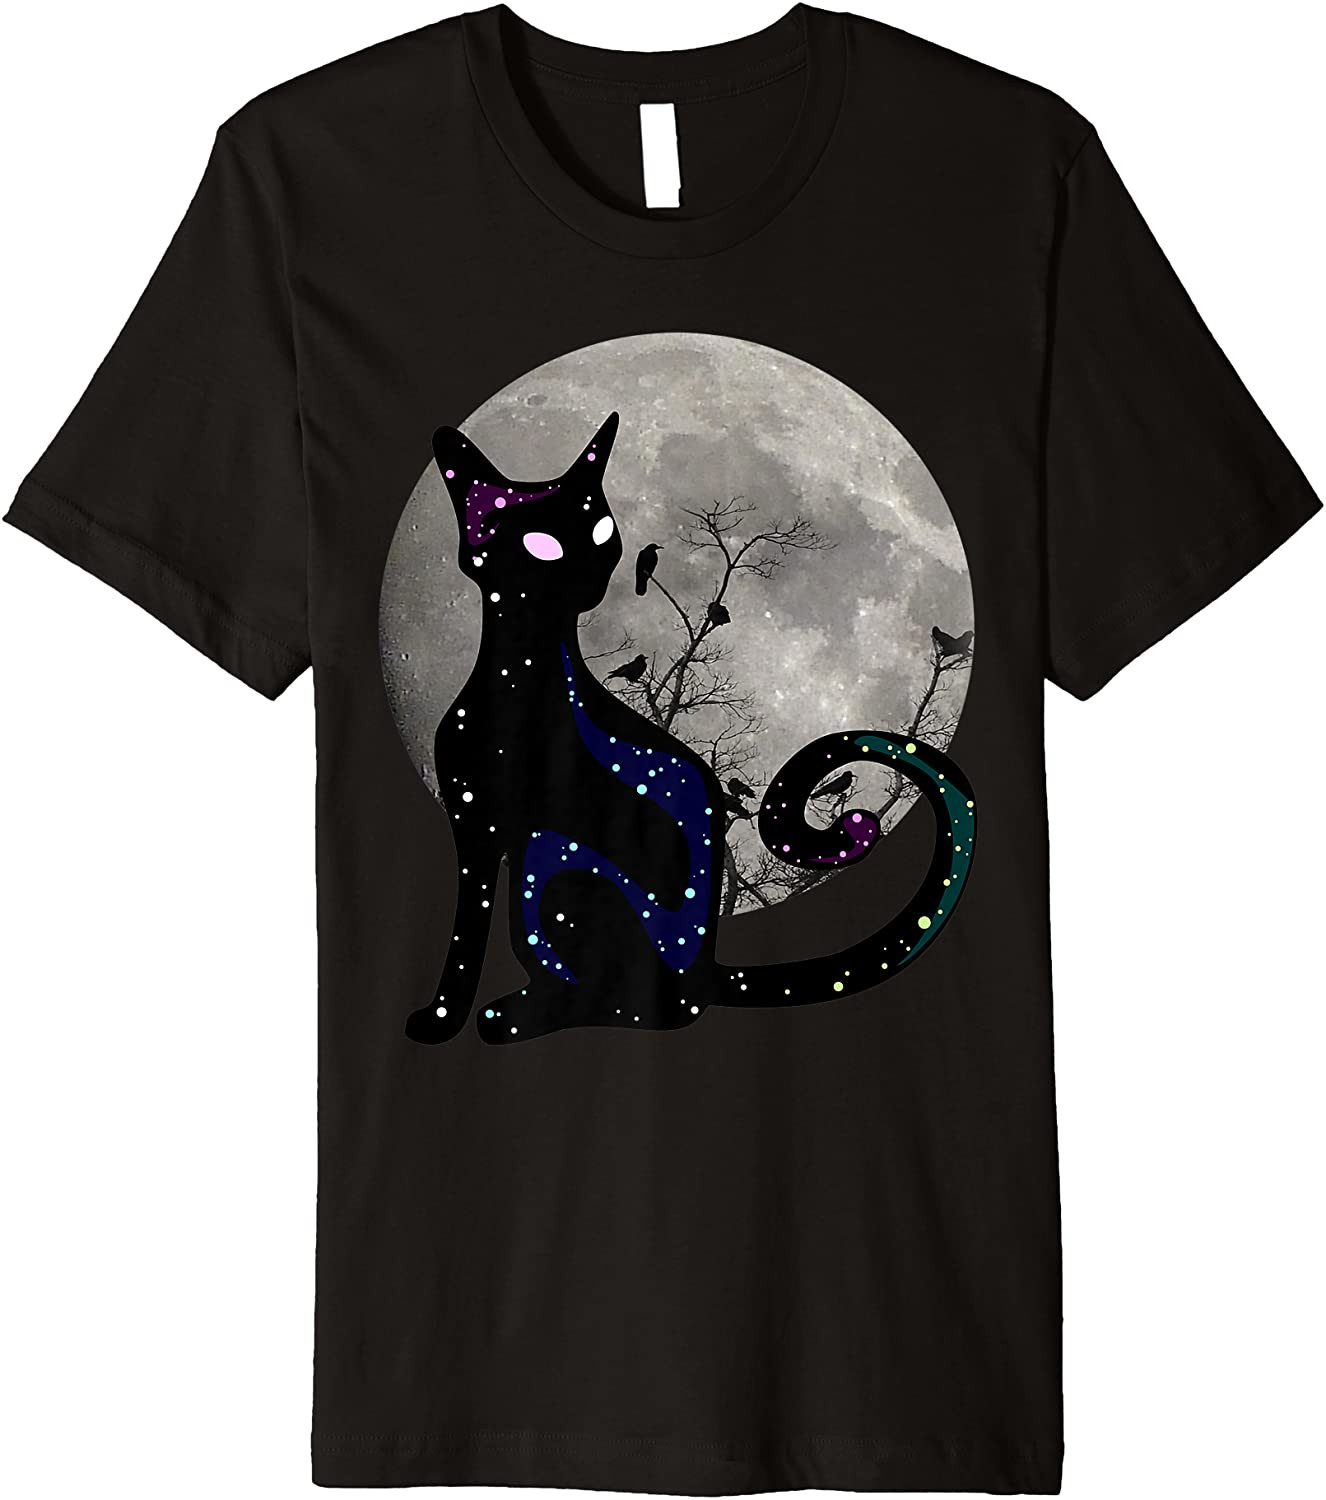 Halloween Cat Scary Black Cat Gothic Looking Halloween Cat T-Shirt